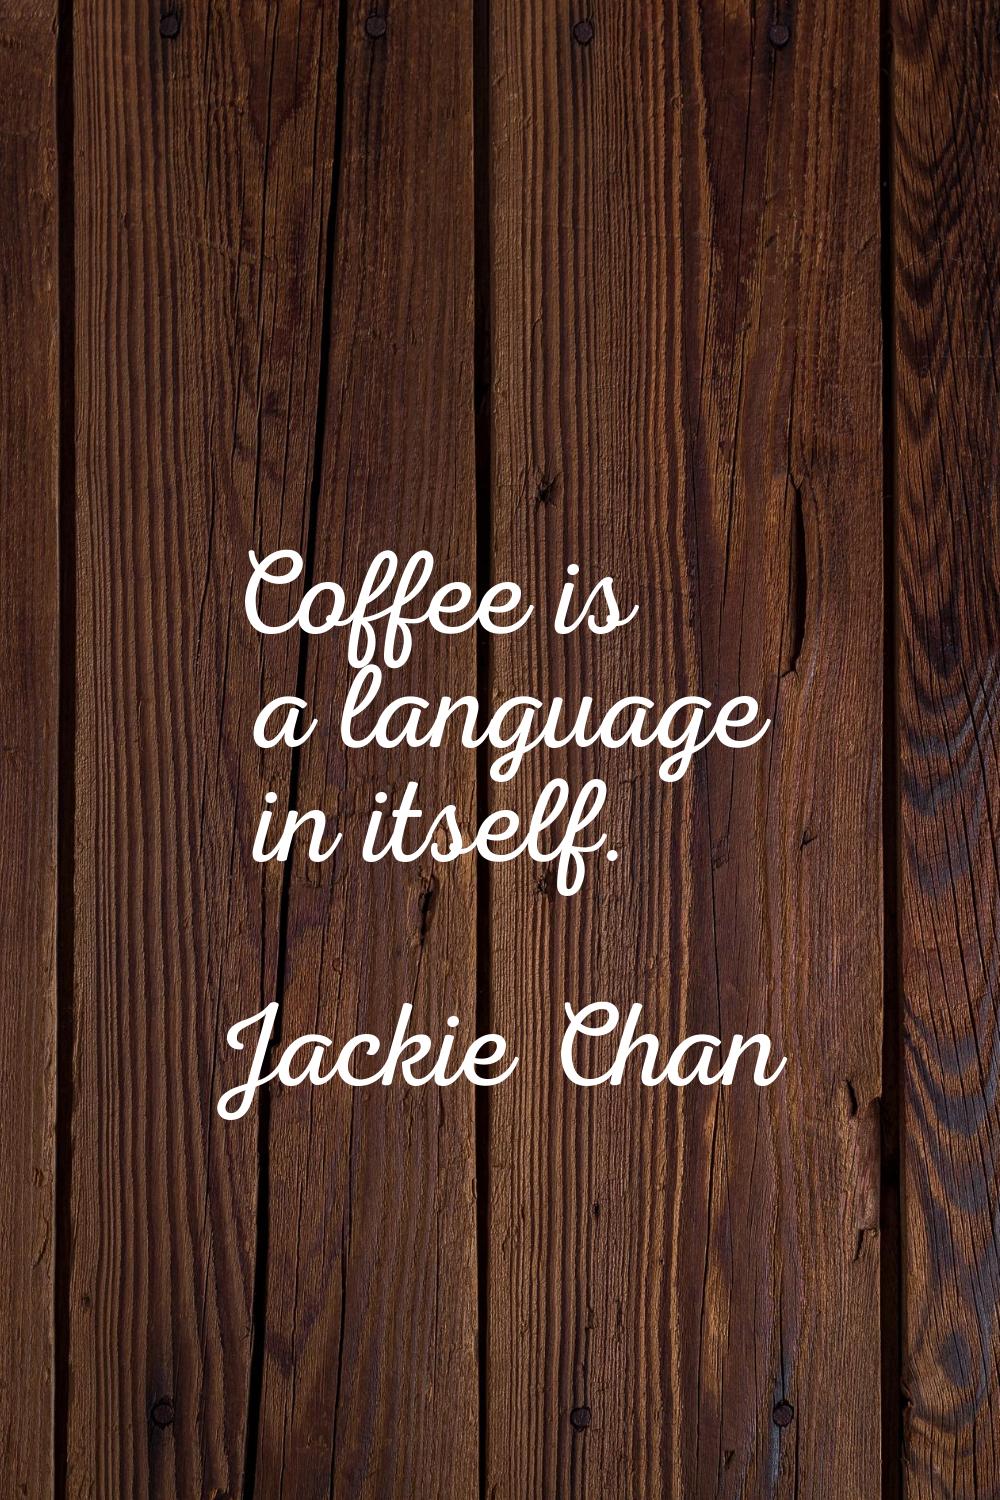 Coffee is a language in itself.